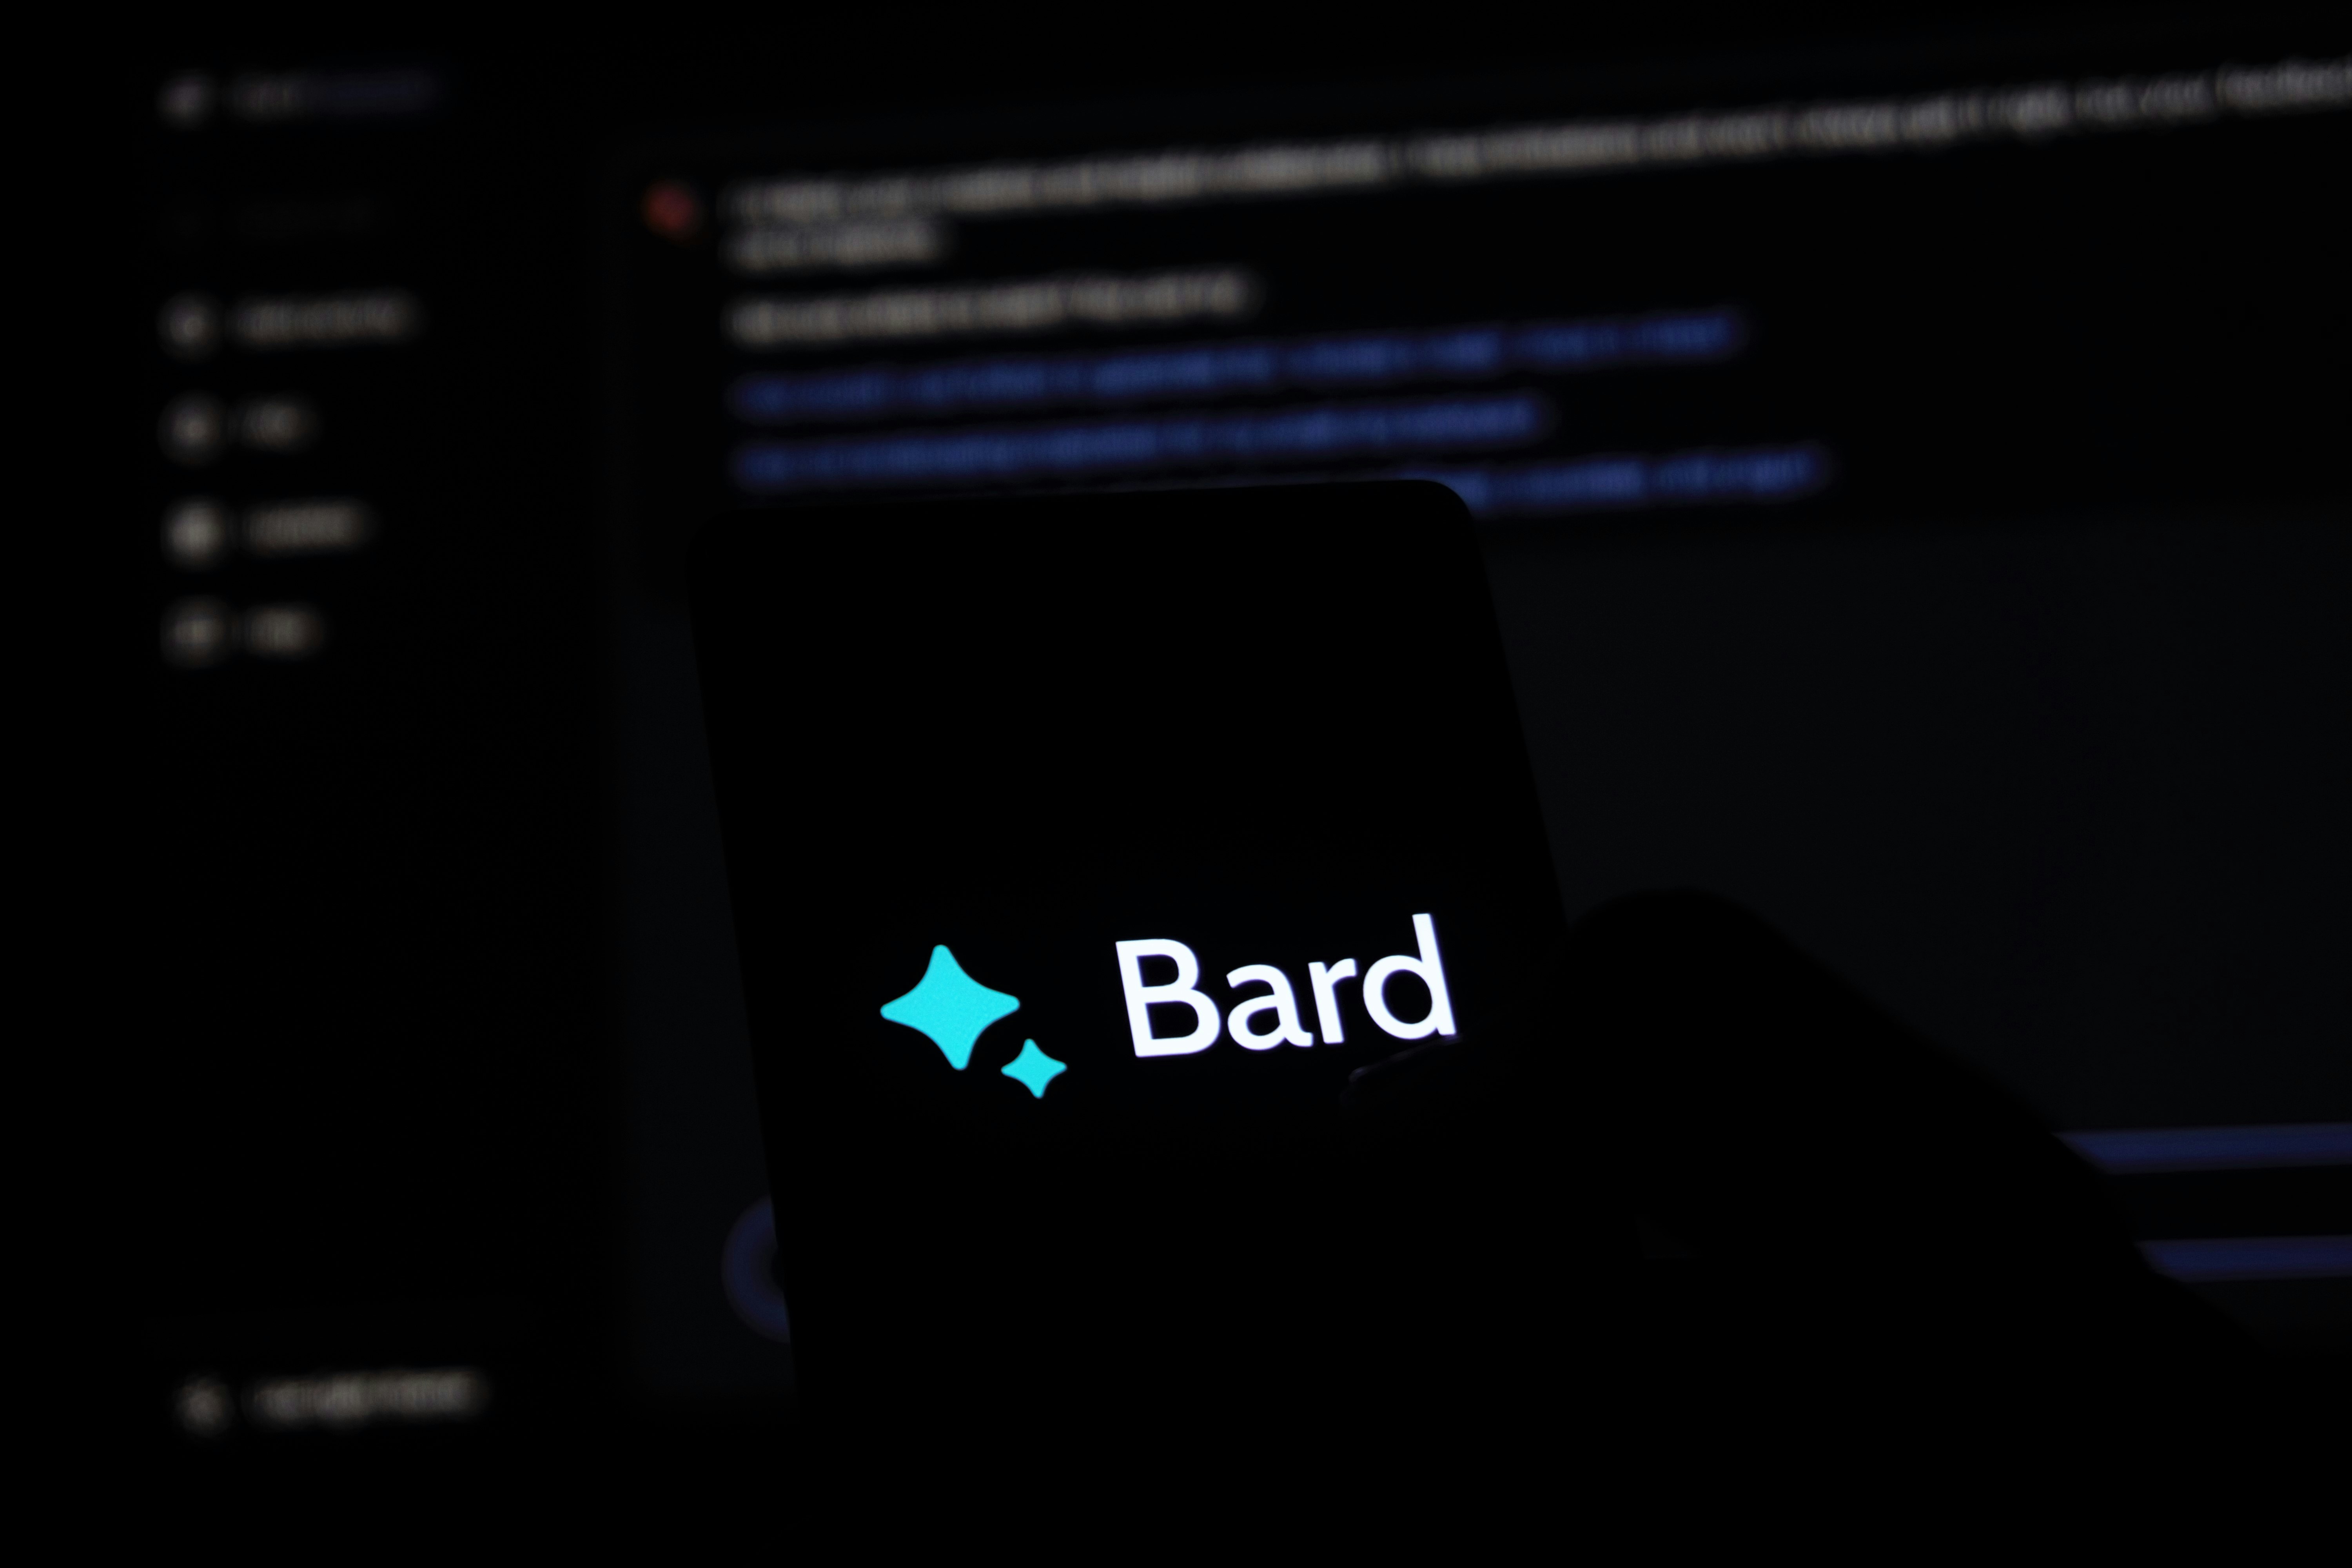 Google will rename Bard to Gemini and launch a dedicated app - leaked